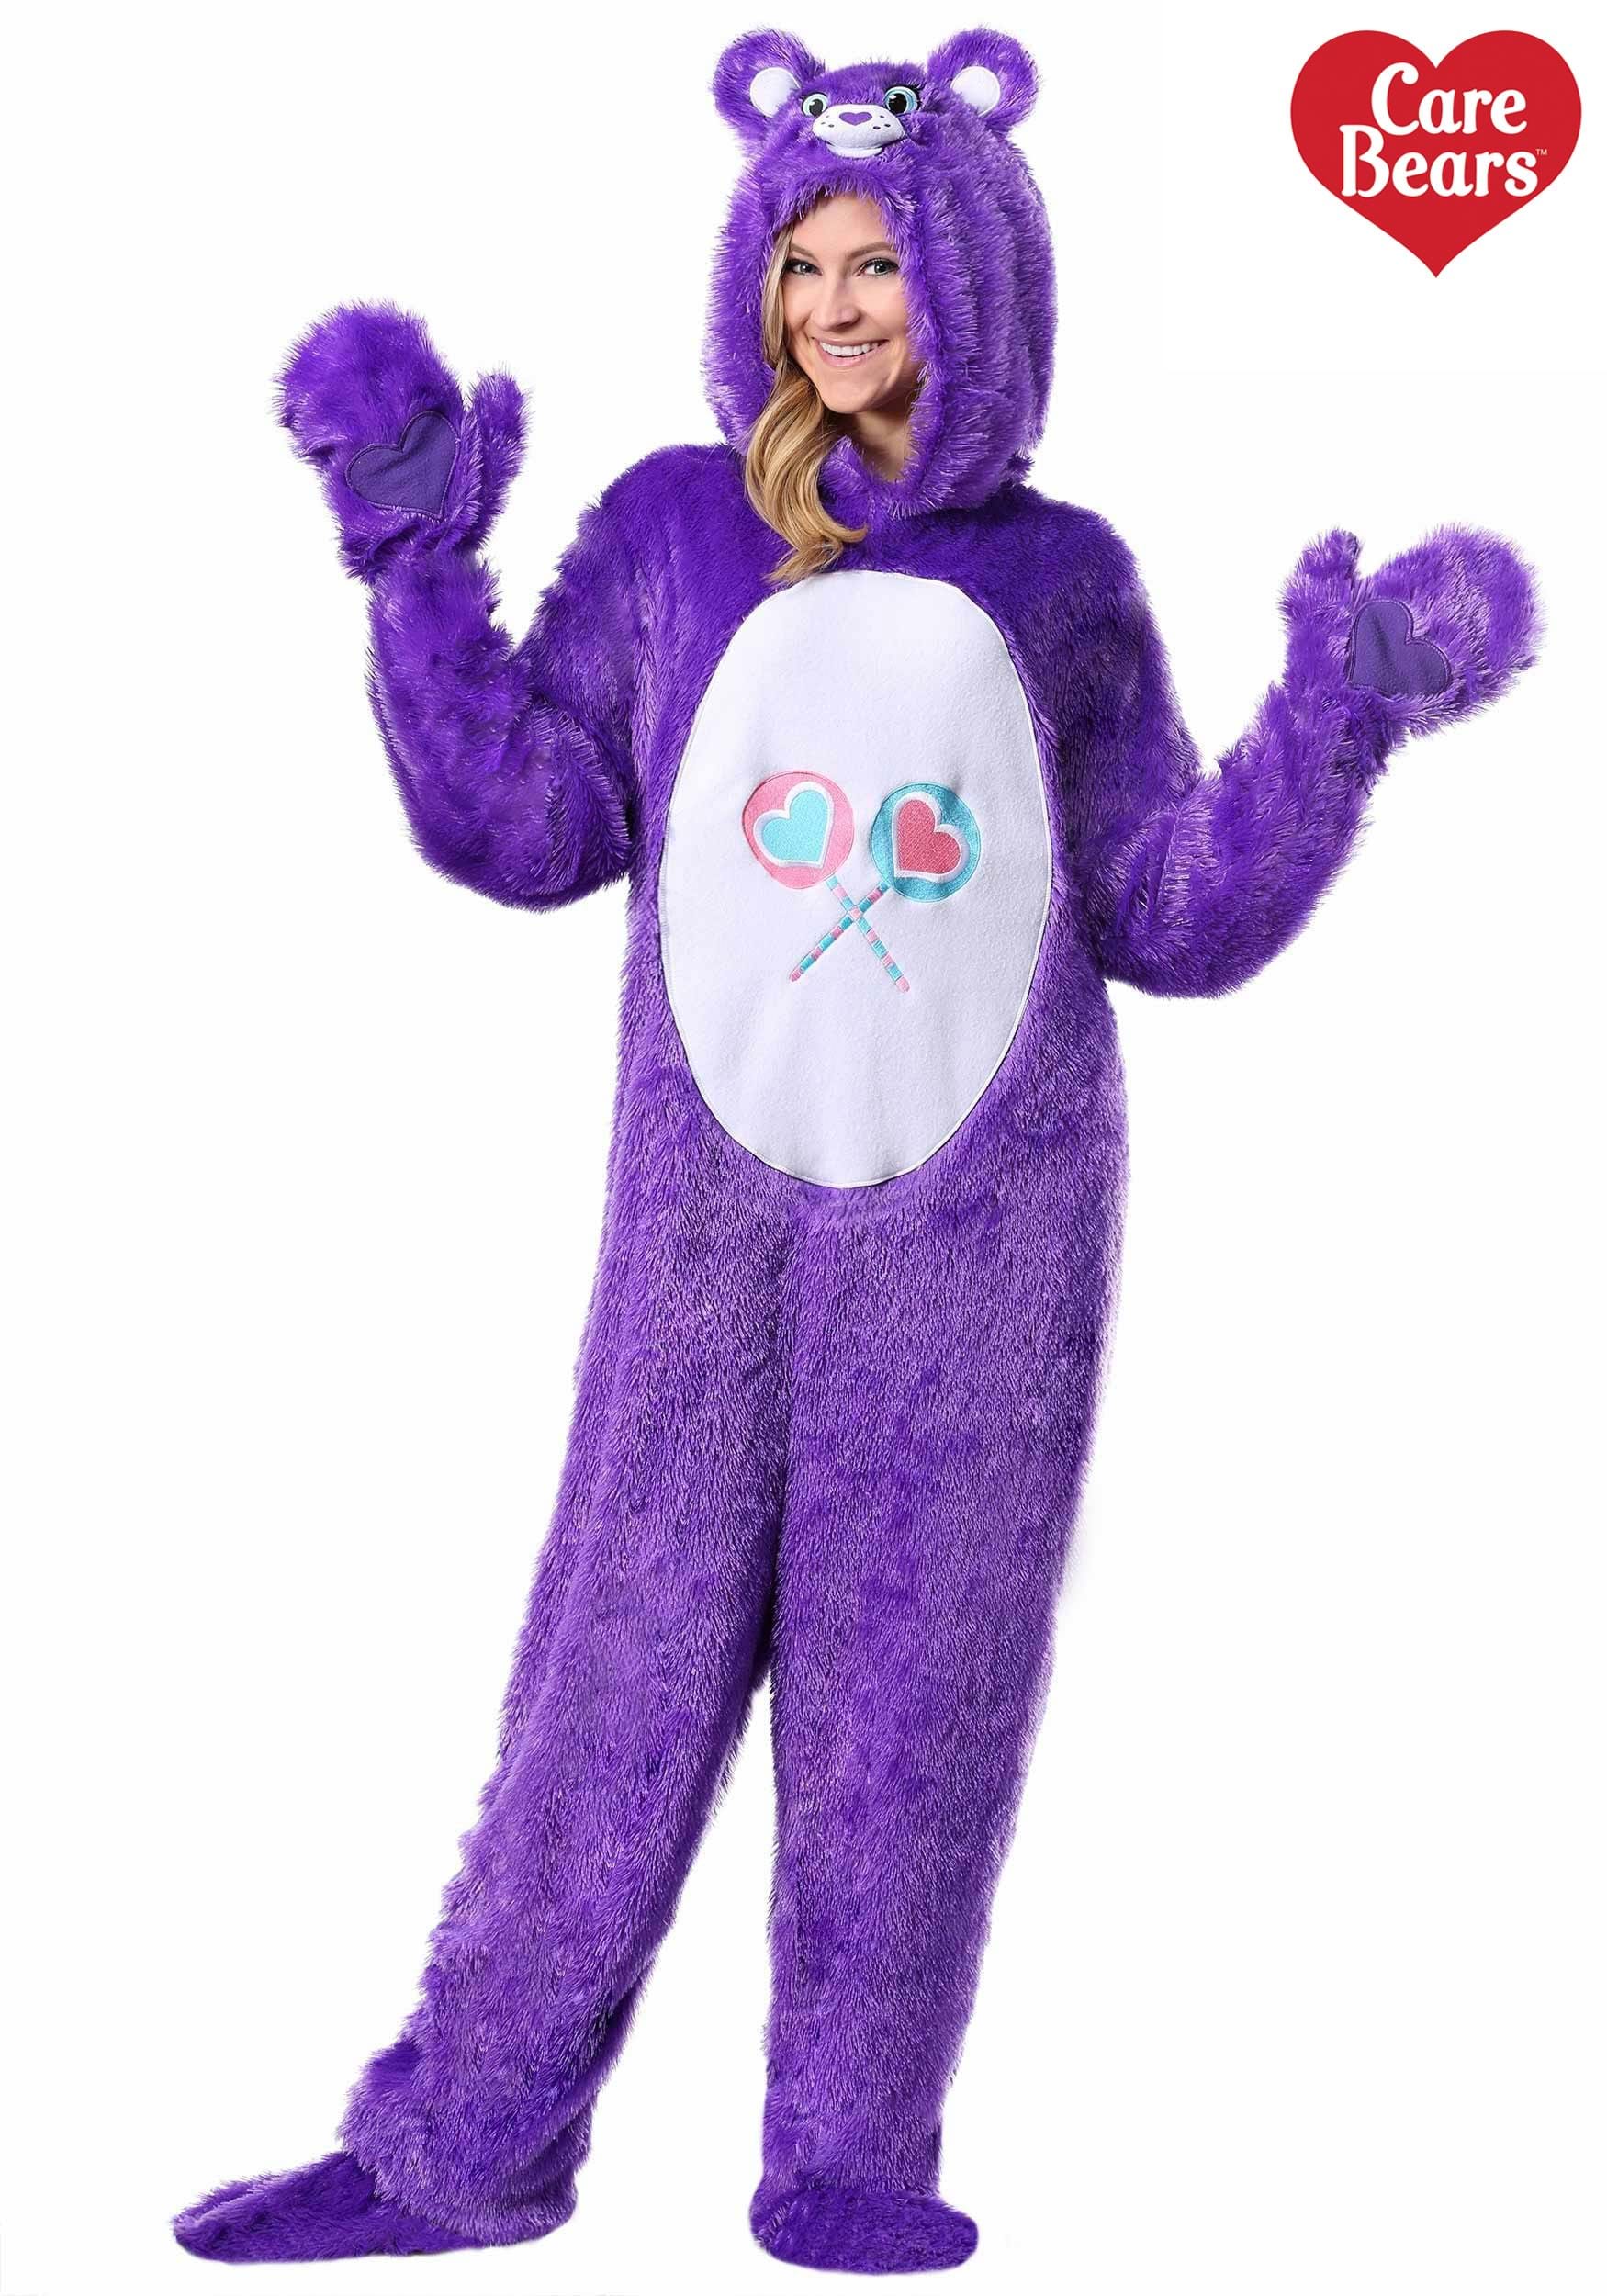 https://images.fun.com/products/41369/1-1/adult-care-bears-classic-share-bear-costume-update.jpg